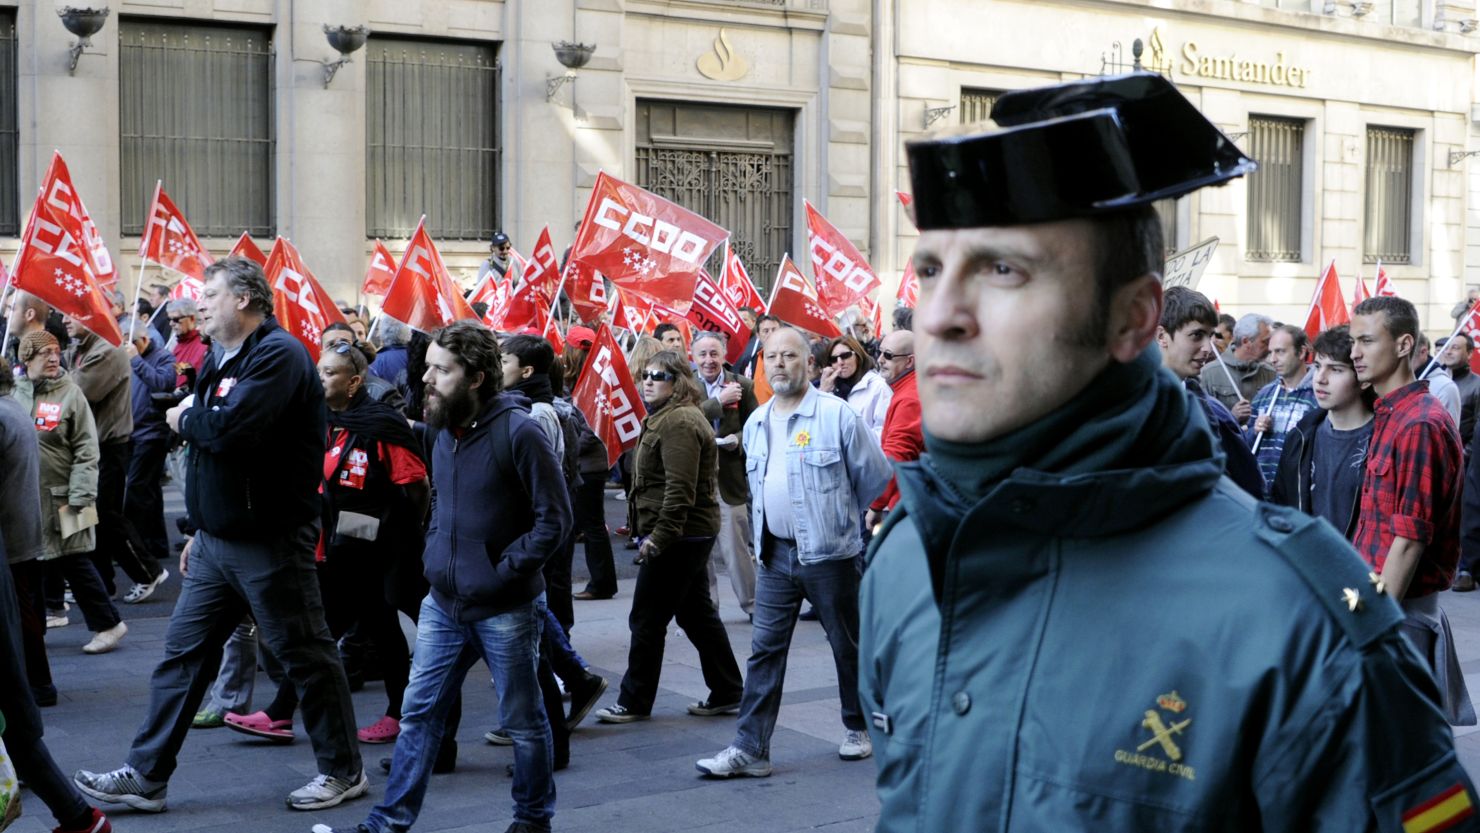 A "Guardia Civil" police officer walks along demonstrators during a day of national strike in central Madrid, Spain, on March 29.